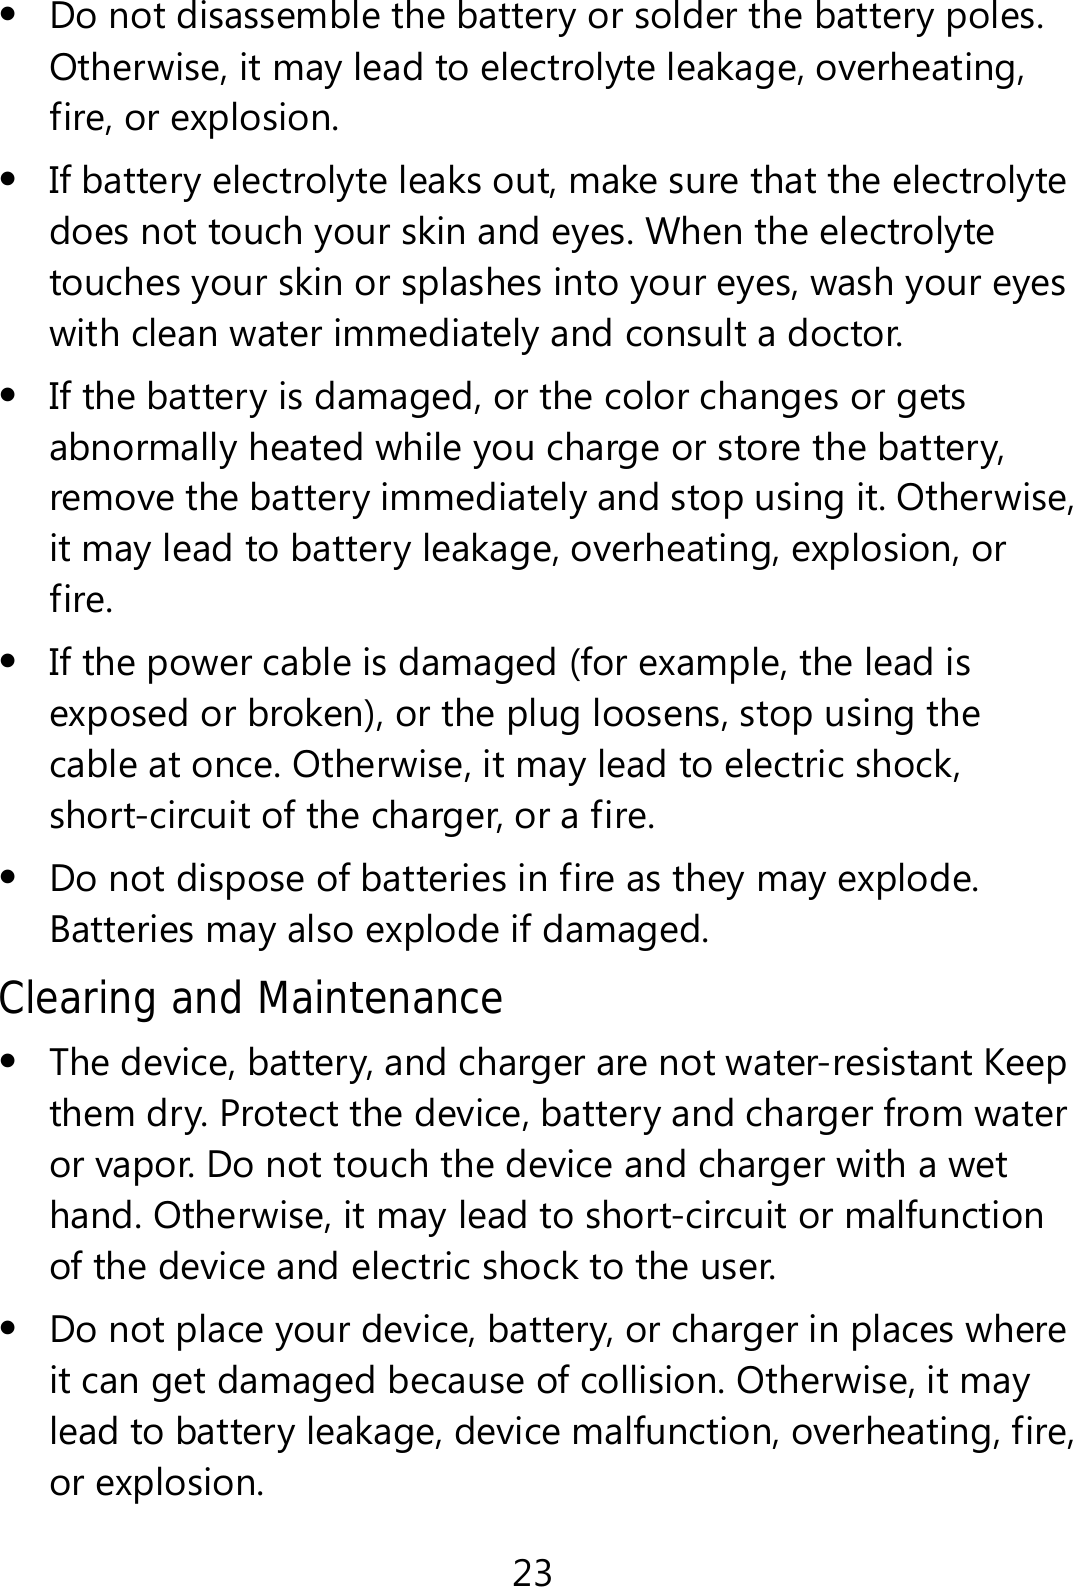 23  Do not disassemble the battery or solder the battery poles. Otherwise, it may lead to electrolyte leakage, overheating, fire, or explosion.  If battery electrolyte leaks out, make sure that the electrolyte does not touch your skin and eyes. When the electrolyte touches your skin or splashes into your eyes, wash your eyes with clean water immediately and consult a doctor.  If the battery is damaged, or the color changes or gets abnormally heated while you charge or store the battery, remove the battery immediately and stop using it. Otherwise, it may lead to battery leakage, overheating, explosion, or fire.  If the power cable is damaged (for example, the lead is exposed or broken), or the plug loosens, stop using the cable at once. Otherwise, it may lead to electric shock, short-circuit of the charger, or a fire.  Do not dispose of batteries in fire as they may explode. Batteries may also explode if damaged. Clearing and Maintenance  The device, battery, and charger are not water-resistant Keep them dry. Protect the device, battery and charger from water or vapor. Do not touch the device and charger with a wet hand. Otherwise, it may lead to short-circuit or malfunction of the device and electric shock to the user.  Do not place your device, battery, or charger in places where it can get damaged because of collision. Otherwise, it may lead to battery leakage, device malfunction, overheating, fire, or explosion. 